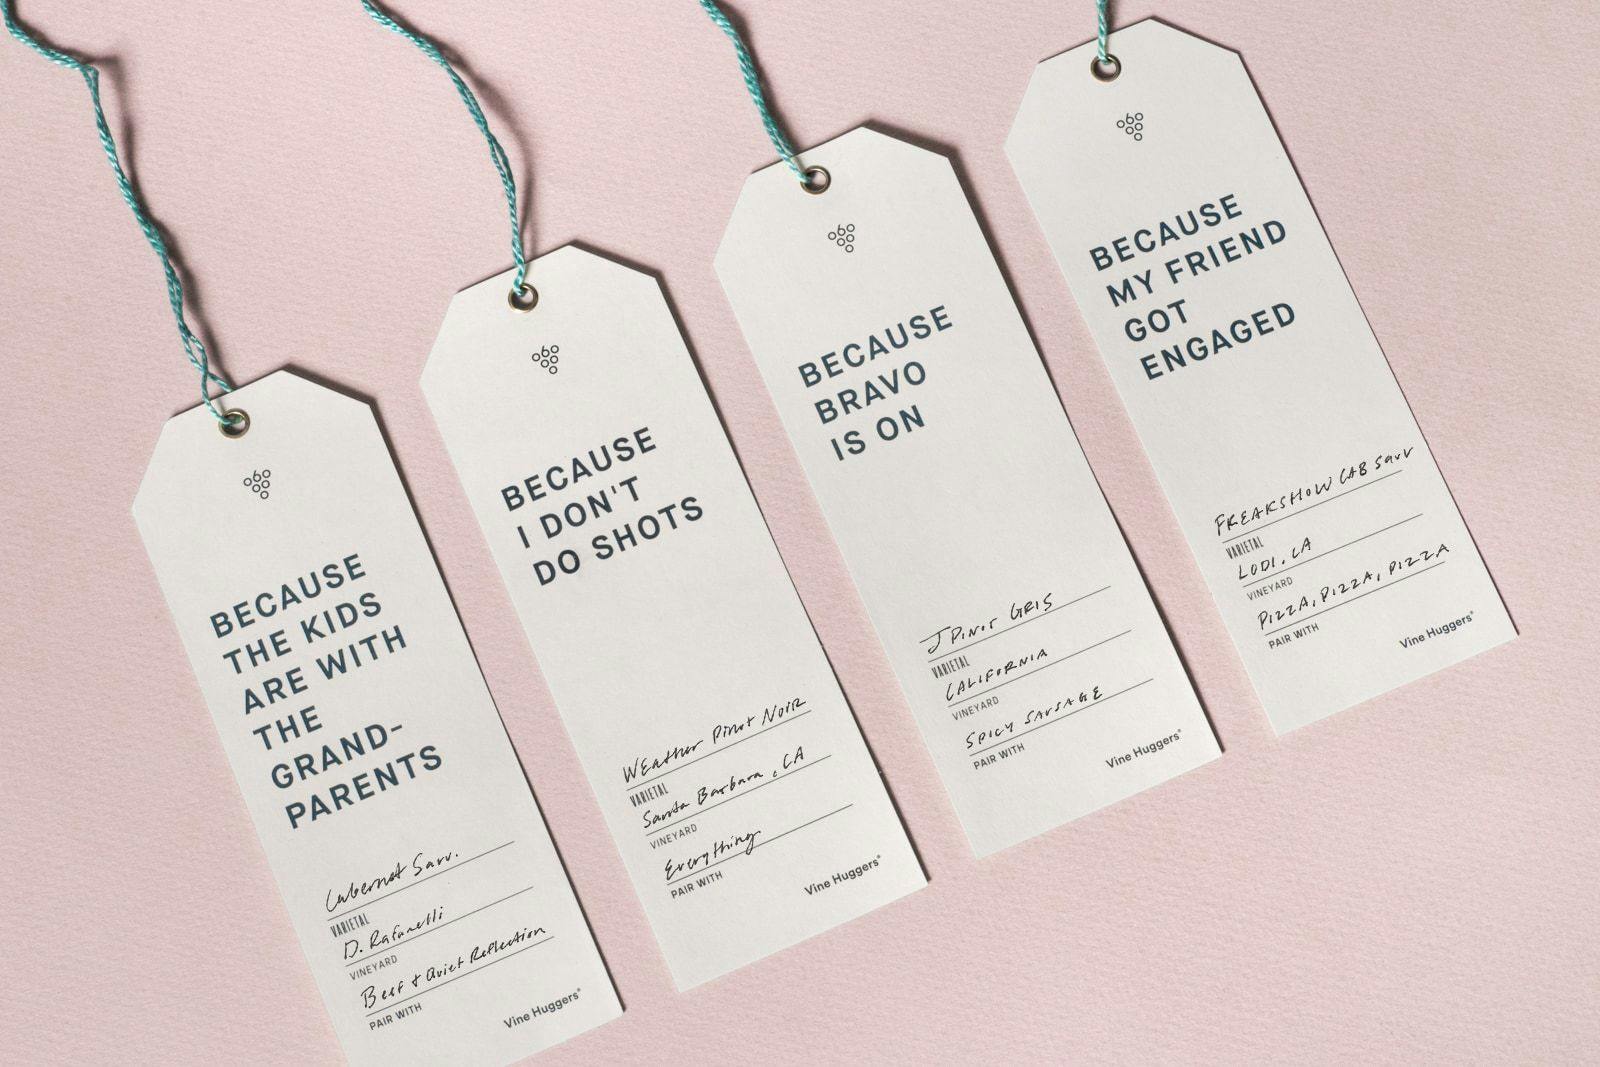 Four wine bottle tags with various messages on them